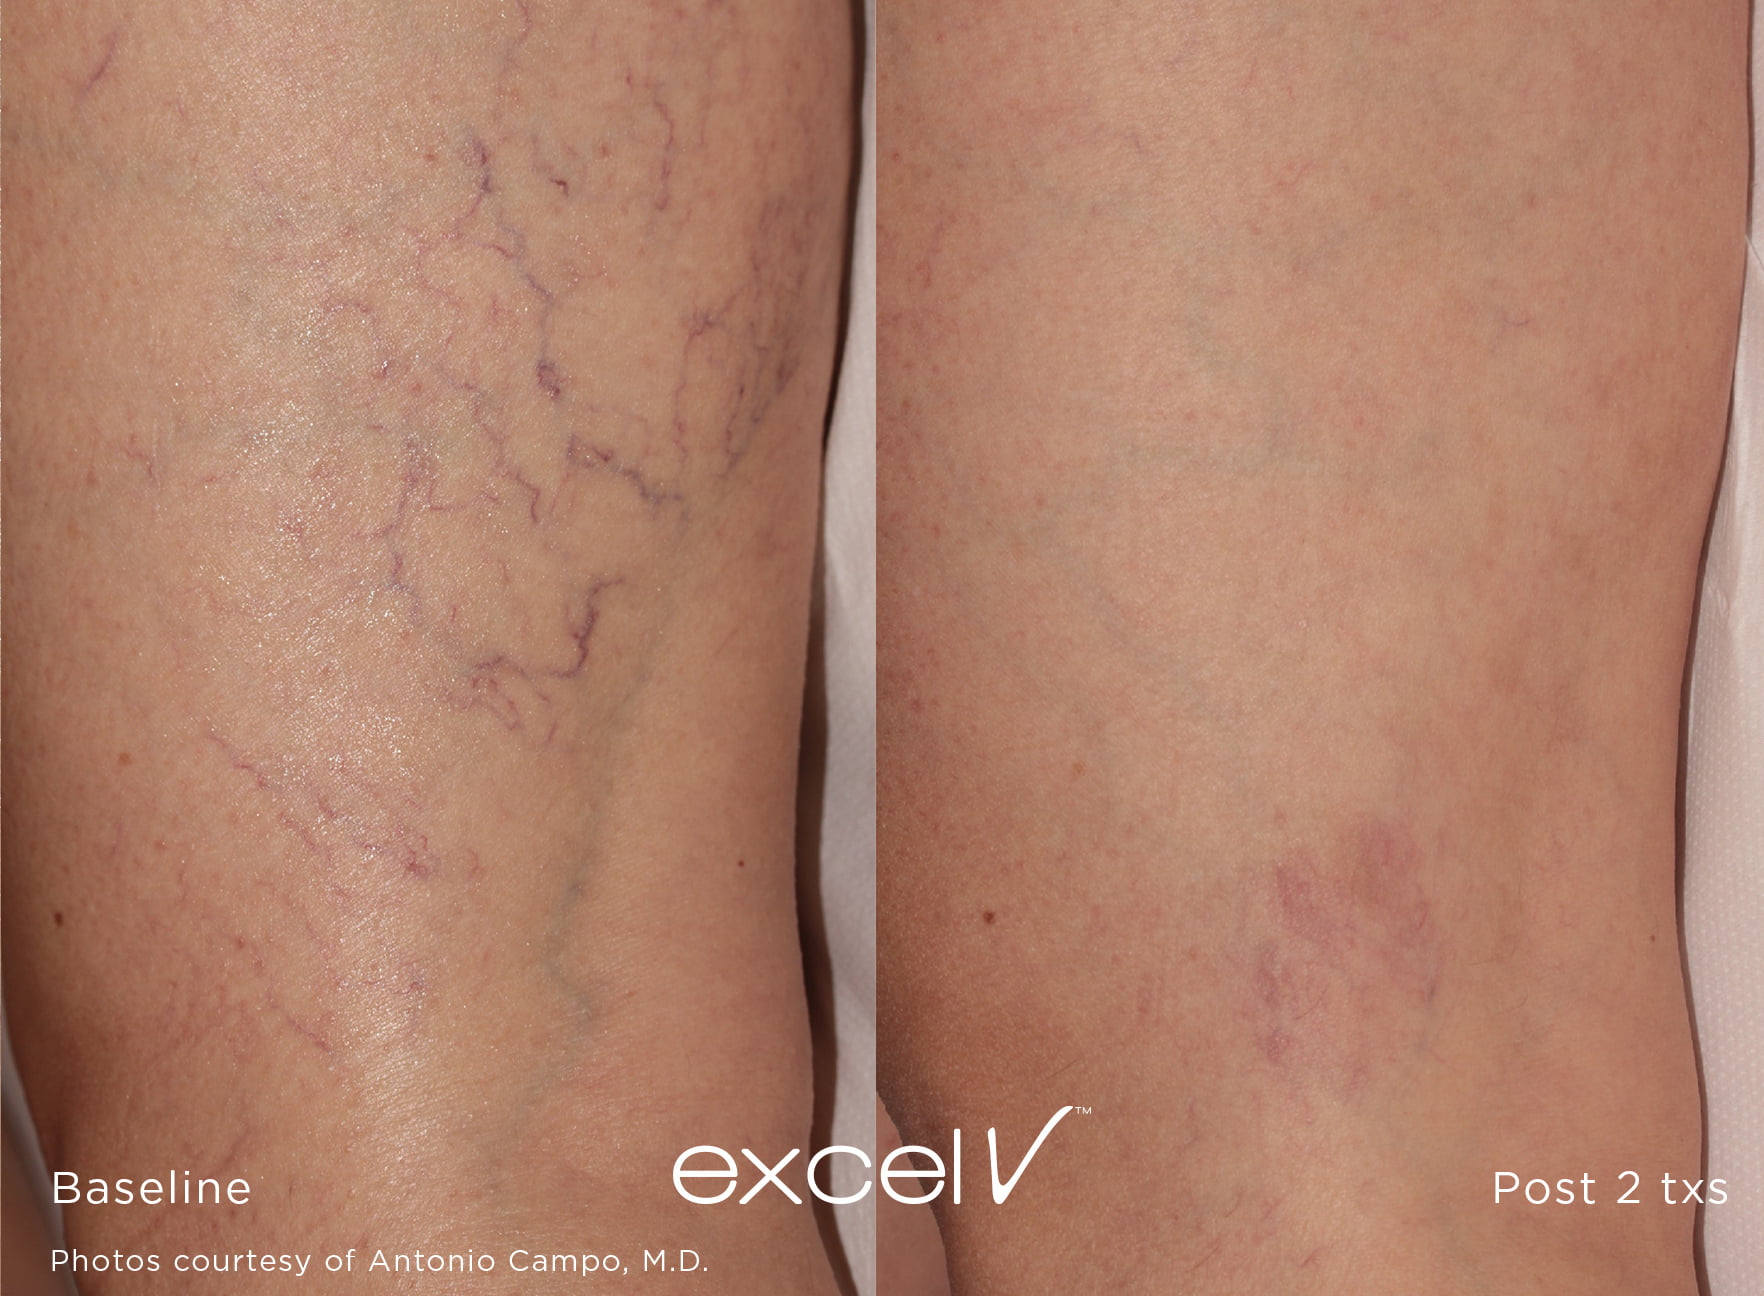 before and after of purple leg veins erased with excel v laser